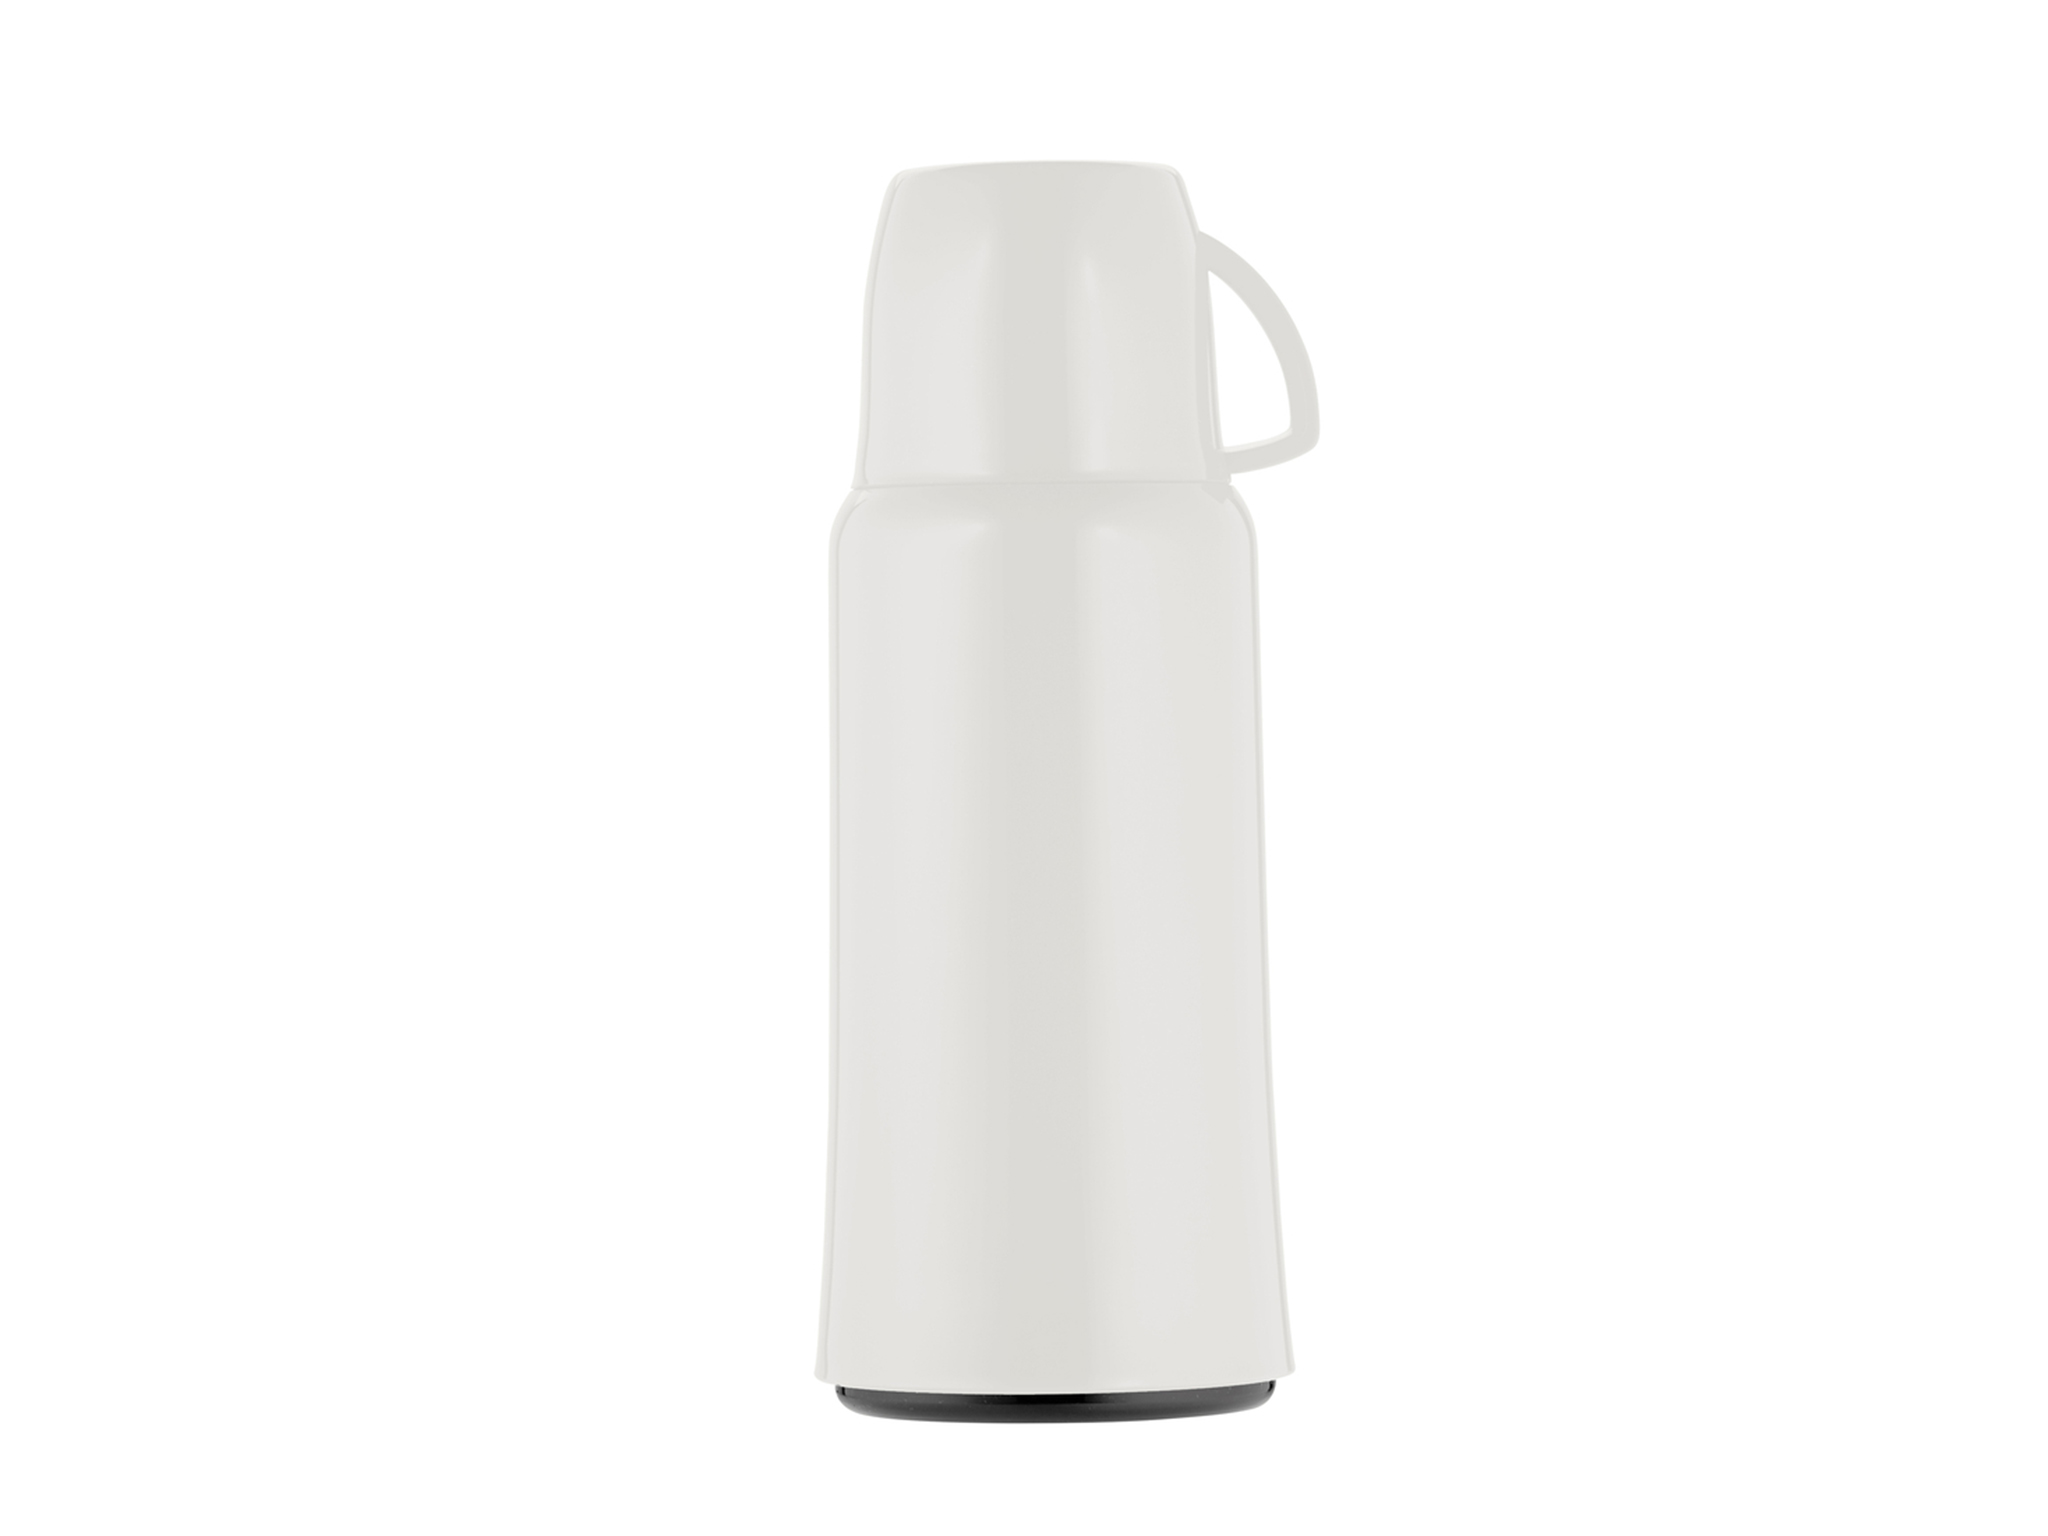 5444-001 - Bouteille isotherme blanc 1.0 L ELEGANCE - Helios